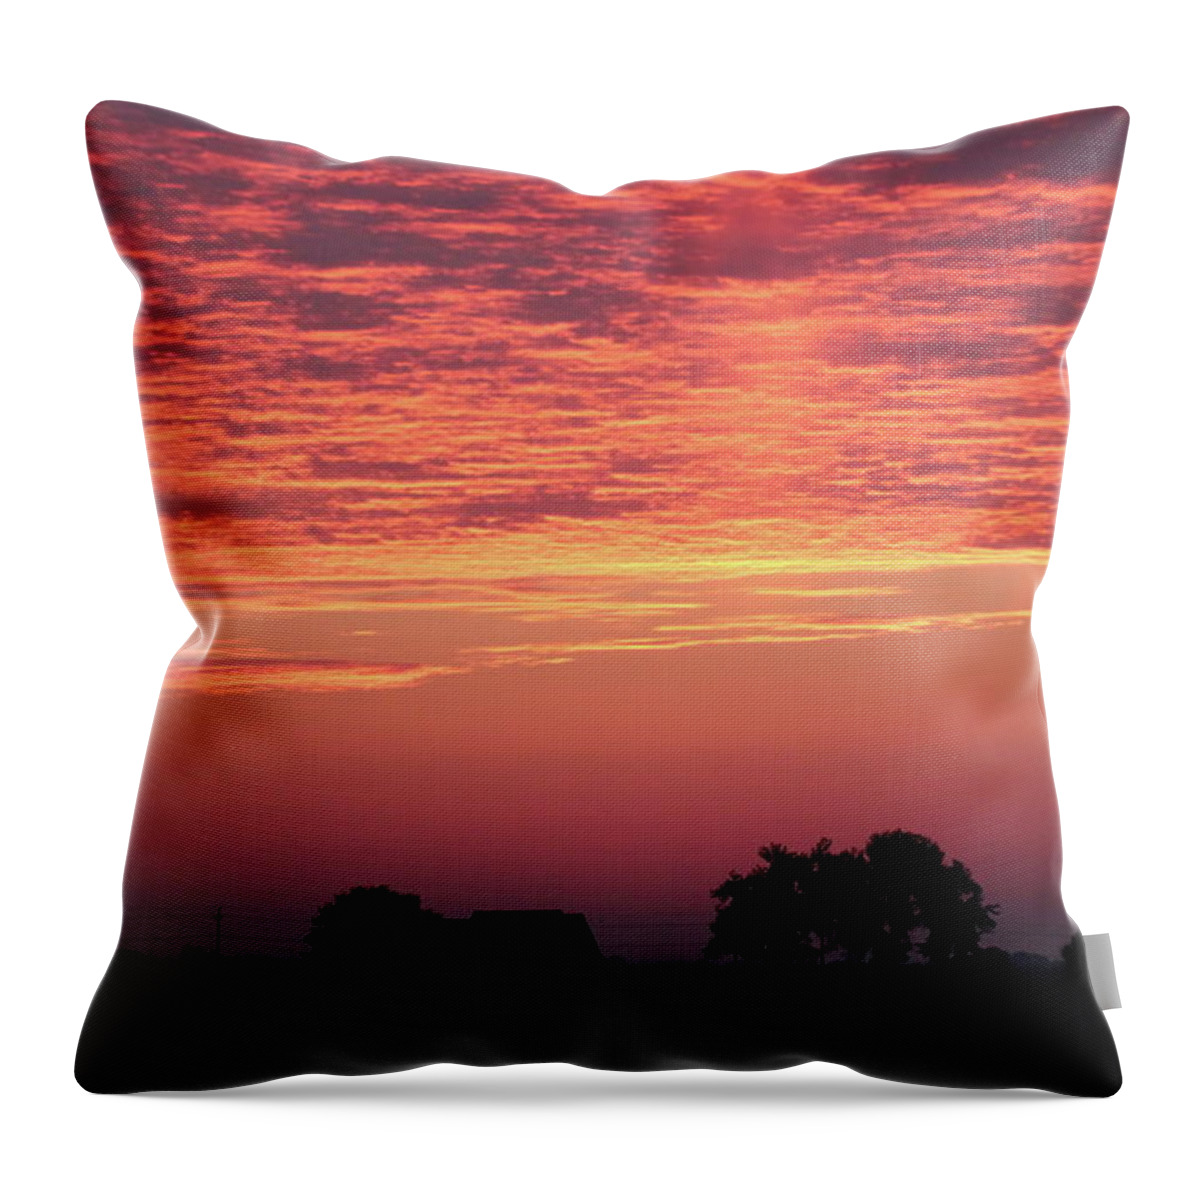 Red Throw Pillow featuring the photograph Red Sunrise by Trent Mallett